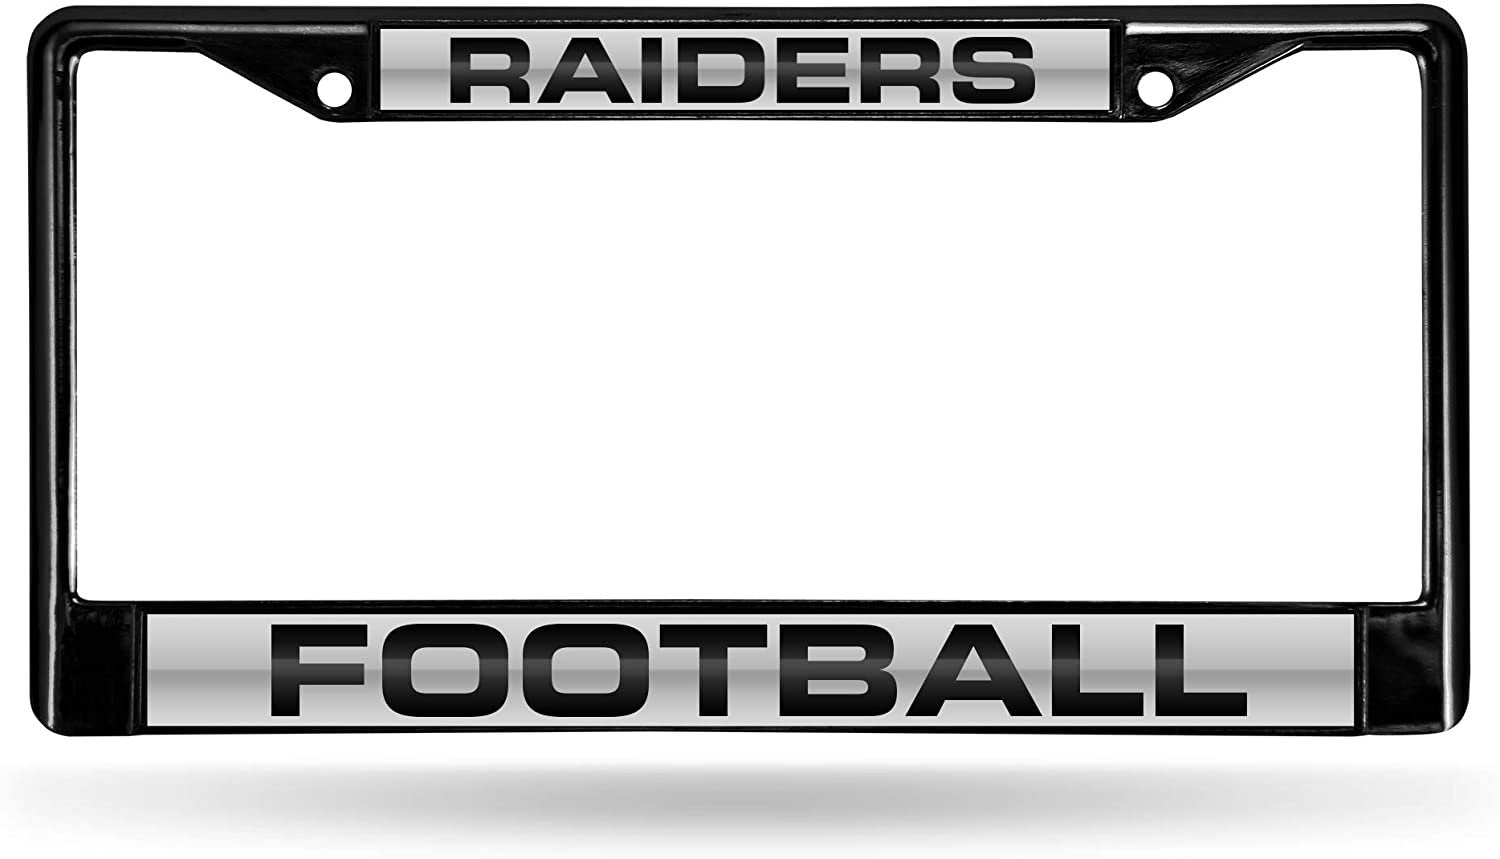 Las Vegas Raiders Black Metal License Plate Frame Tag Cover, Laser Acrylic Mirrored Inserts, 12x6 Inch